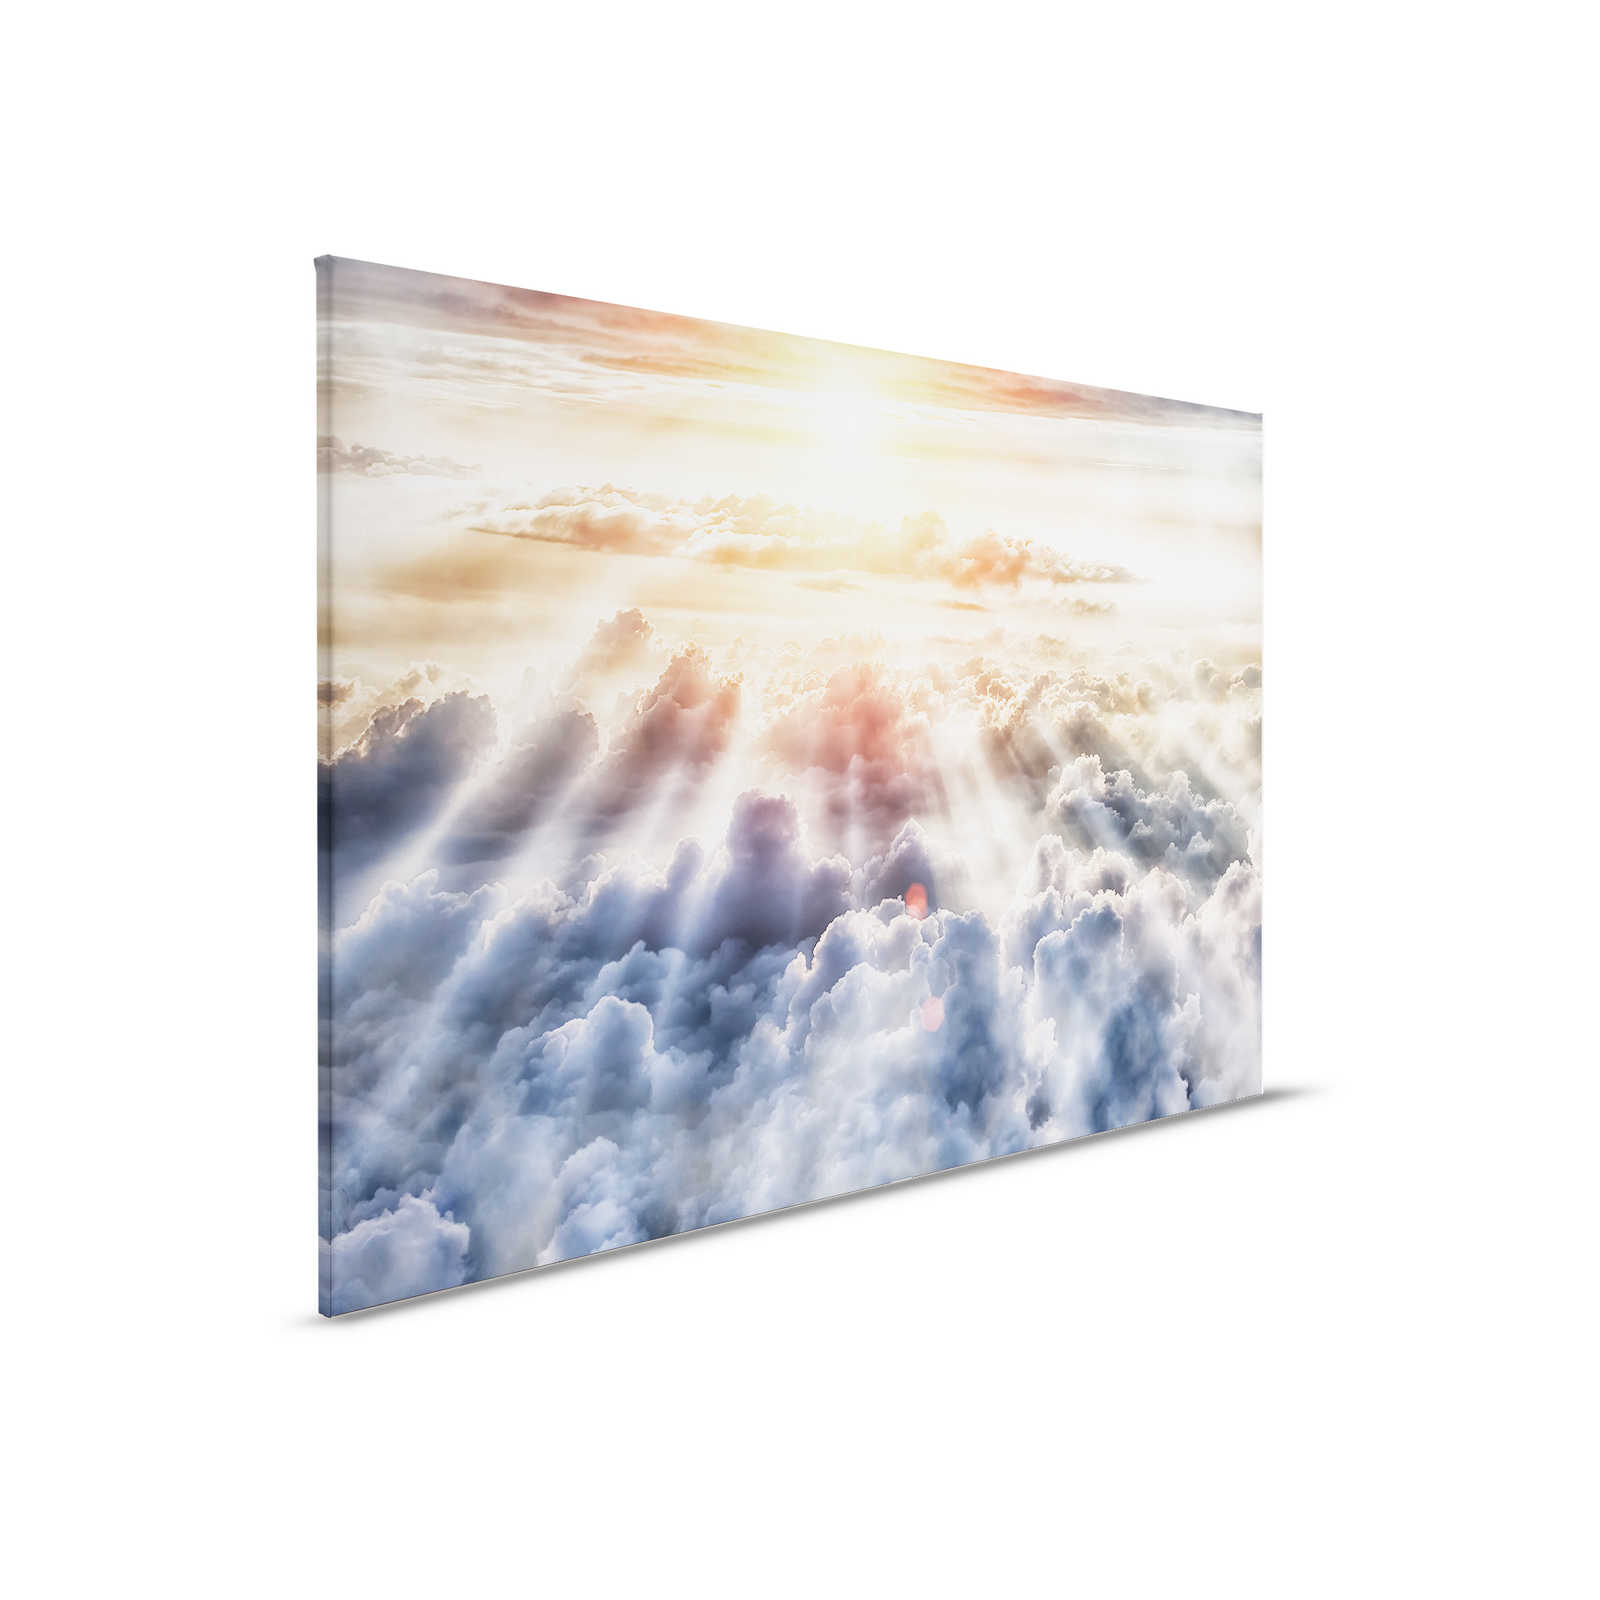         Canvas painting Sky with sunshine and clouds | orange, grey, blue - 0,90 m x 0,60 m
    